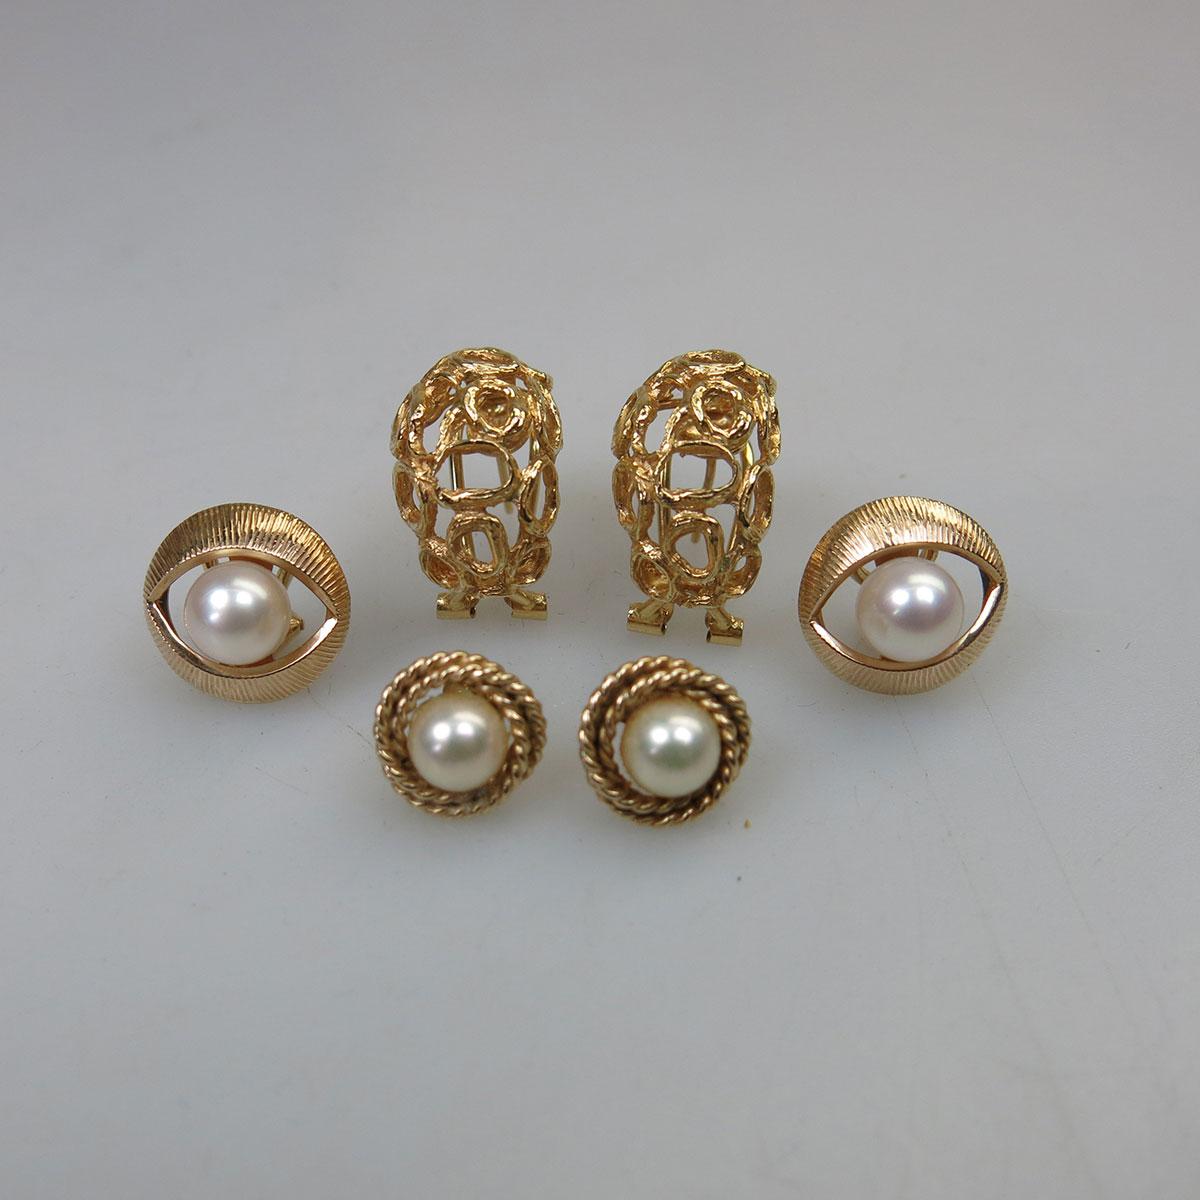 3 Pairs Of 14k Yellow Gold Earrings